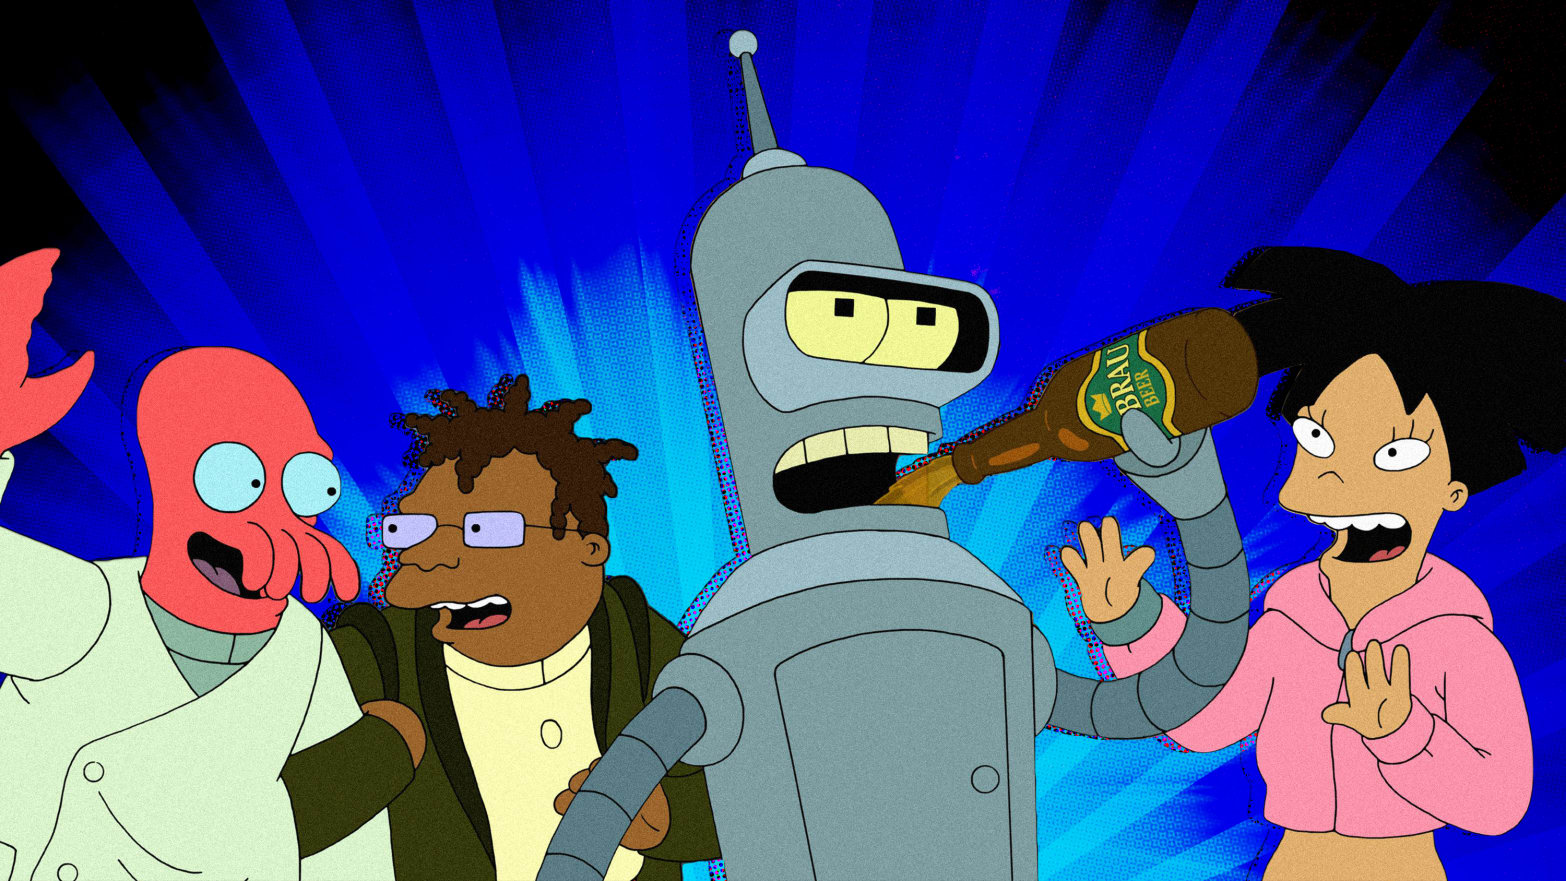 A photo illustration of the cast from the new season of Futurama.